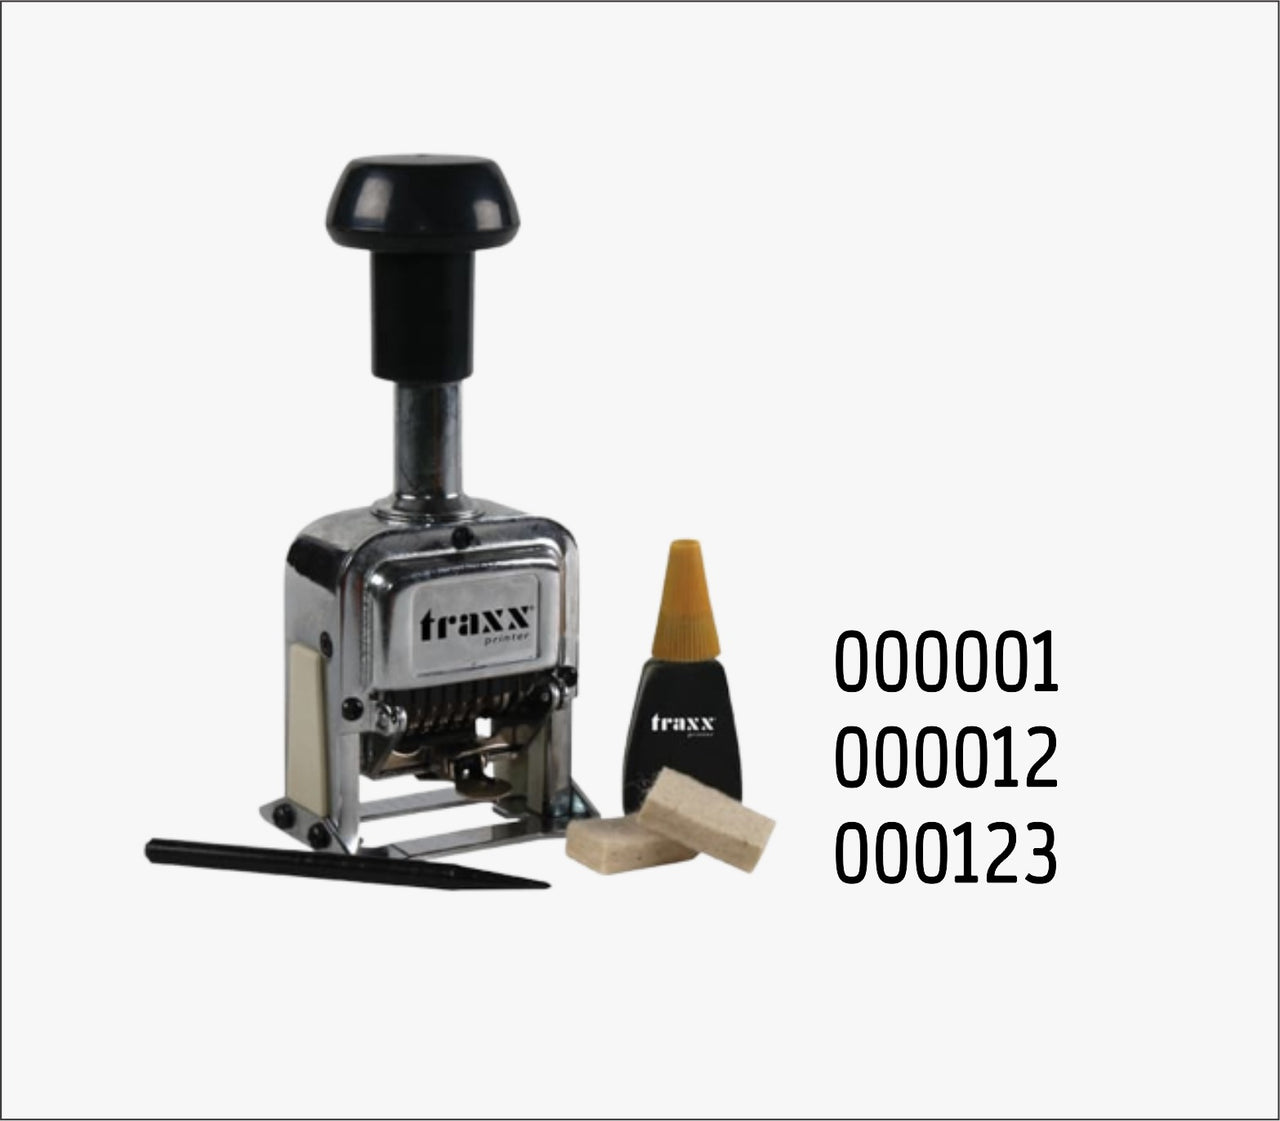 automatic numbering machine stamp